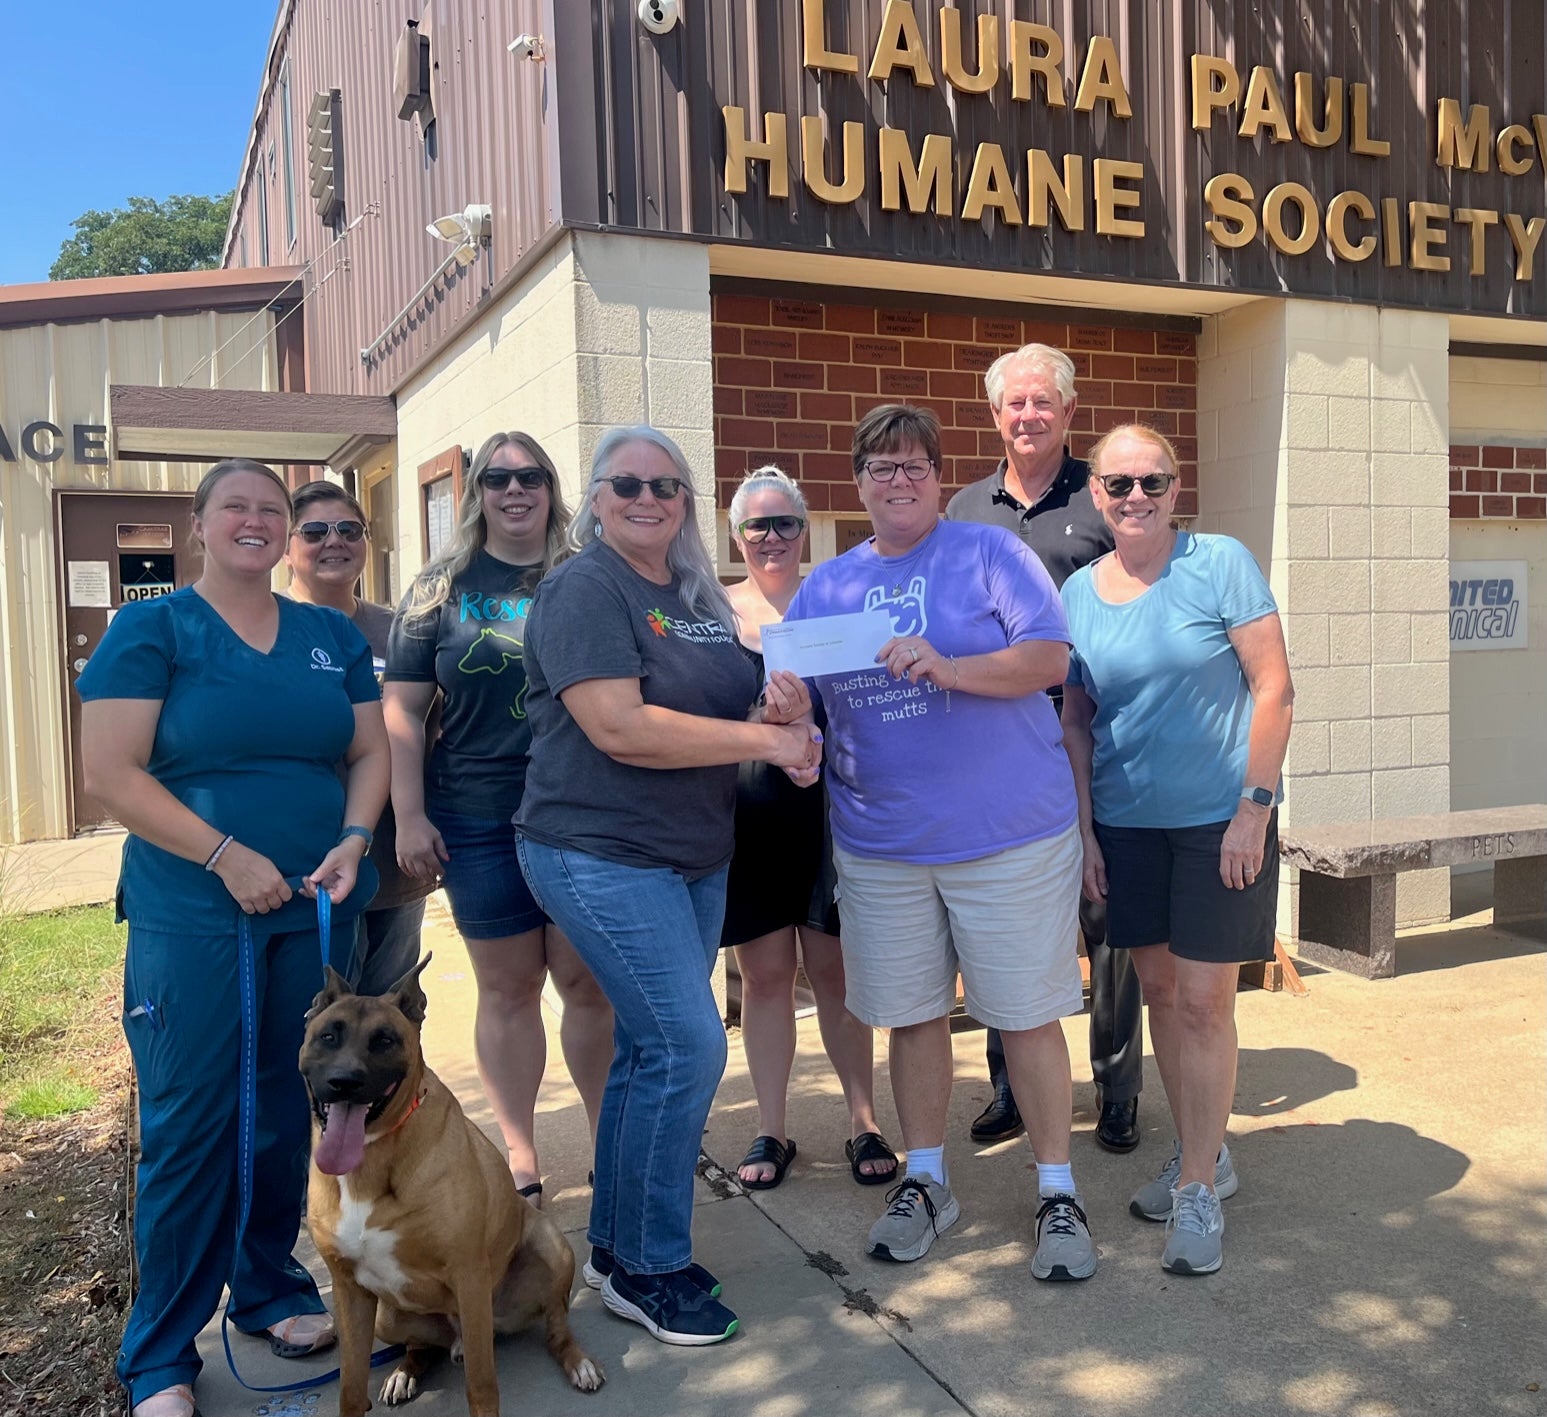 From left to right: Melanie Secrest, Stephanie Peetoom, Max the dog, Melissa Tillotson, Central Community Foundation board member Donna Dollins, Cylene Walker-Willis, Jackie Ross-Guerrero, Central Trustee Ken Starks, and Ruthie Francis.